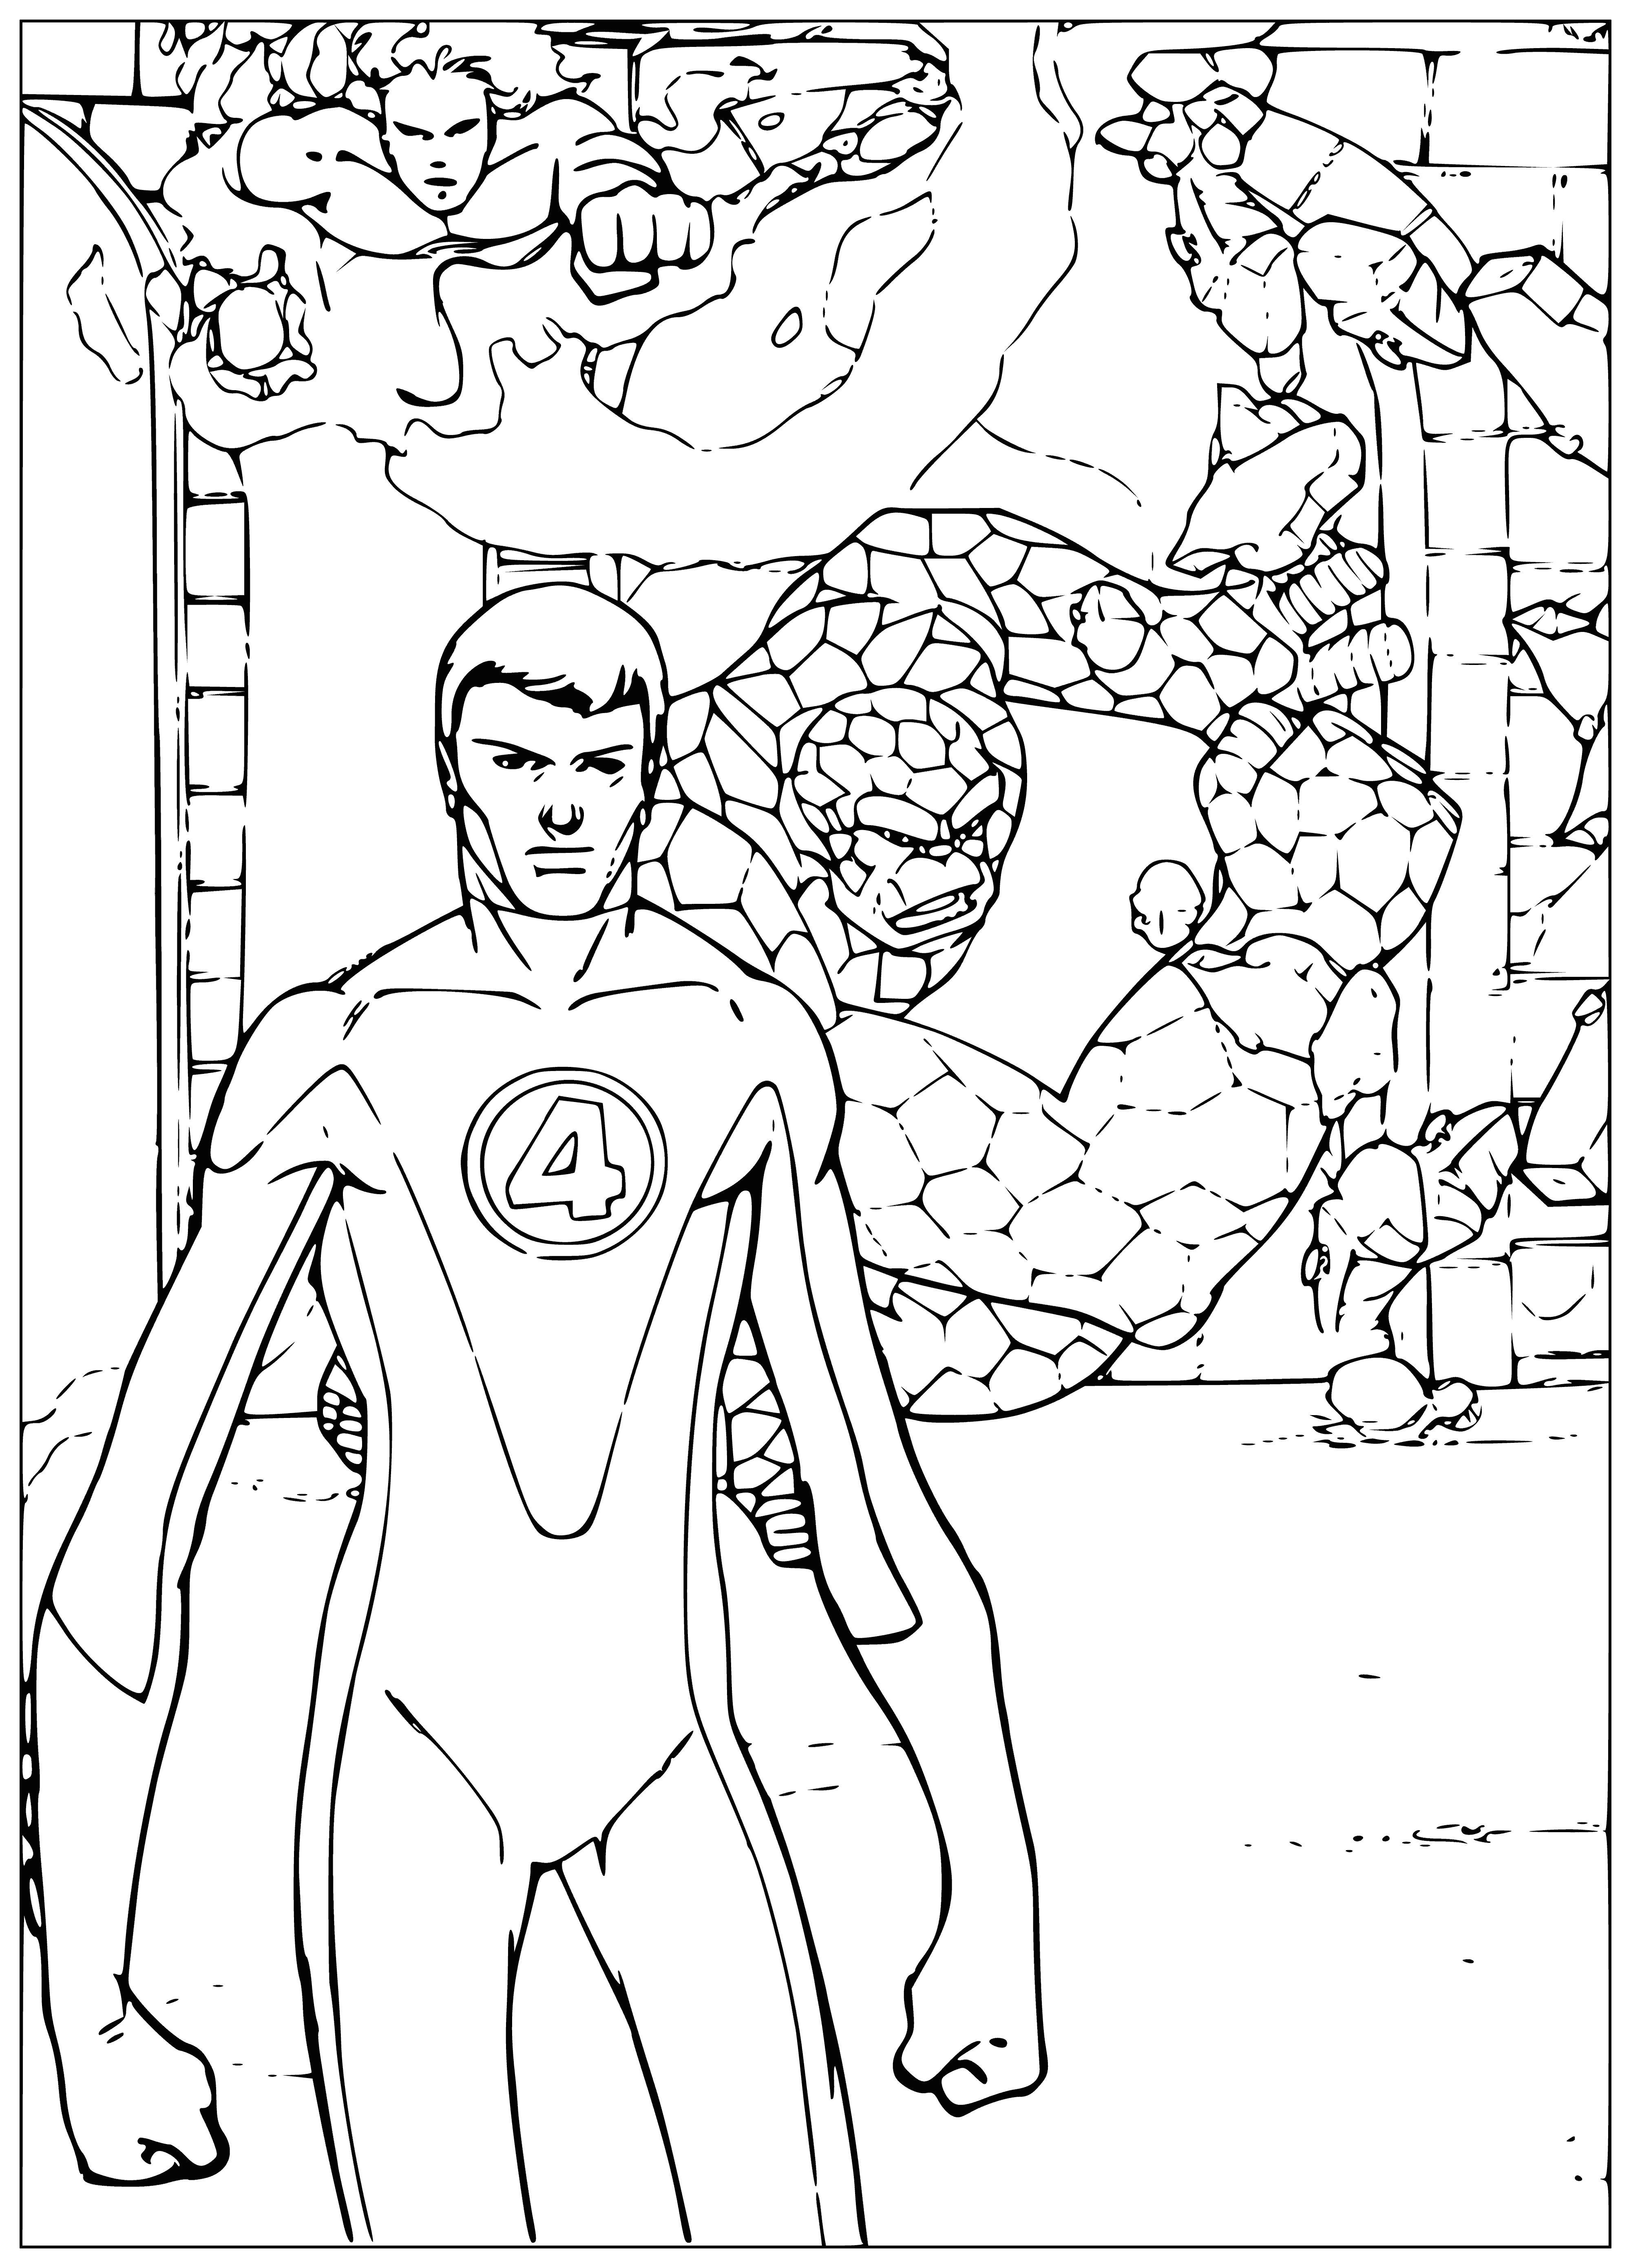 coloring page: The Fantastic Four are Marvel's most famous superhero team, including Mr.Fantastic, Invisible Woman, Human Torch & Thing.